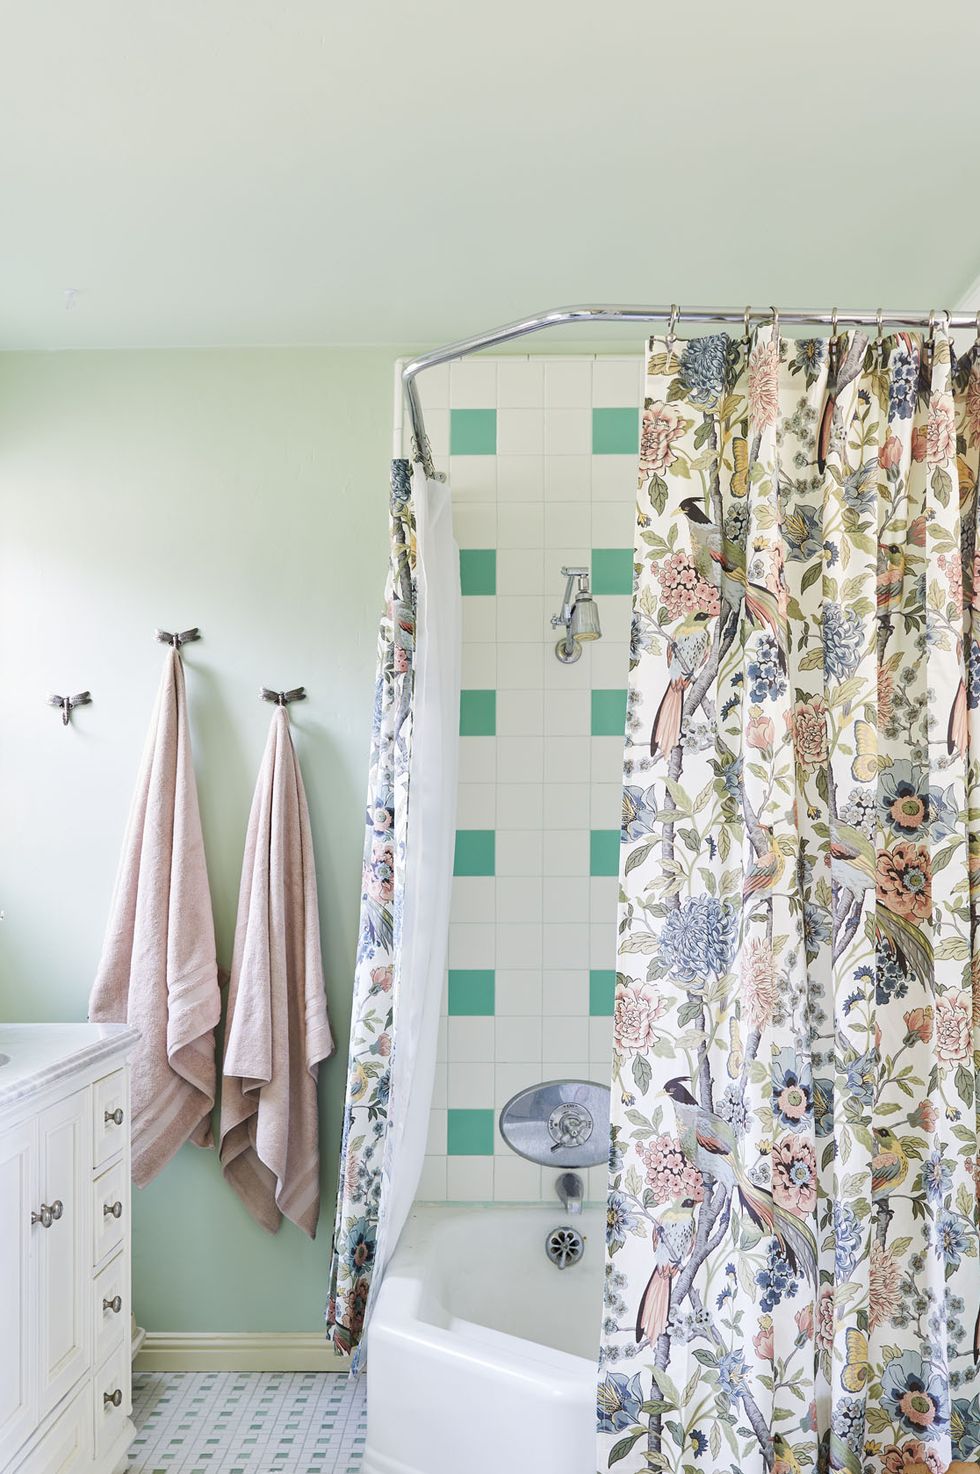 Bathroom with floral curtains